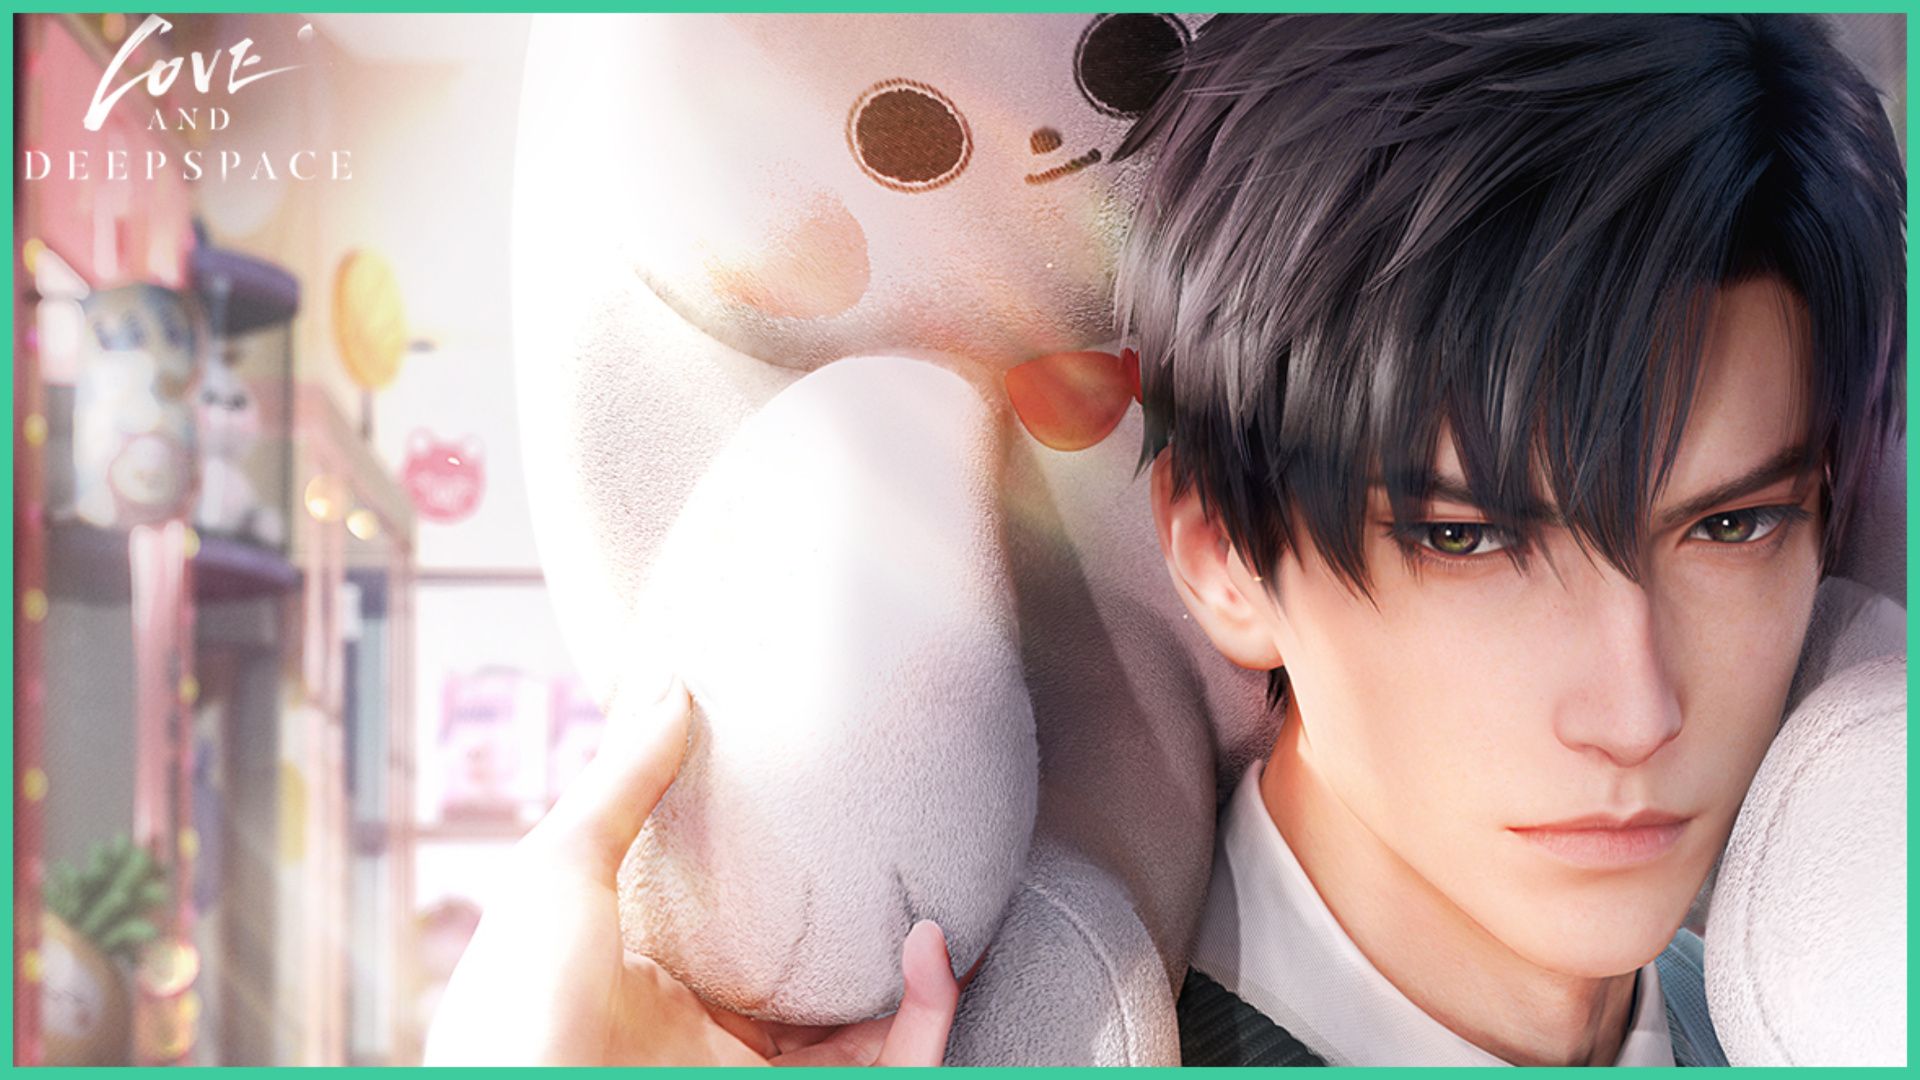 feature image for our love and deepspace zayne profile, the image features a promo image of the character as he has a teddy around his neck at a fair, zayne has a serious expression on his face as if he's trying to hide his awkwardness